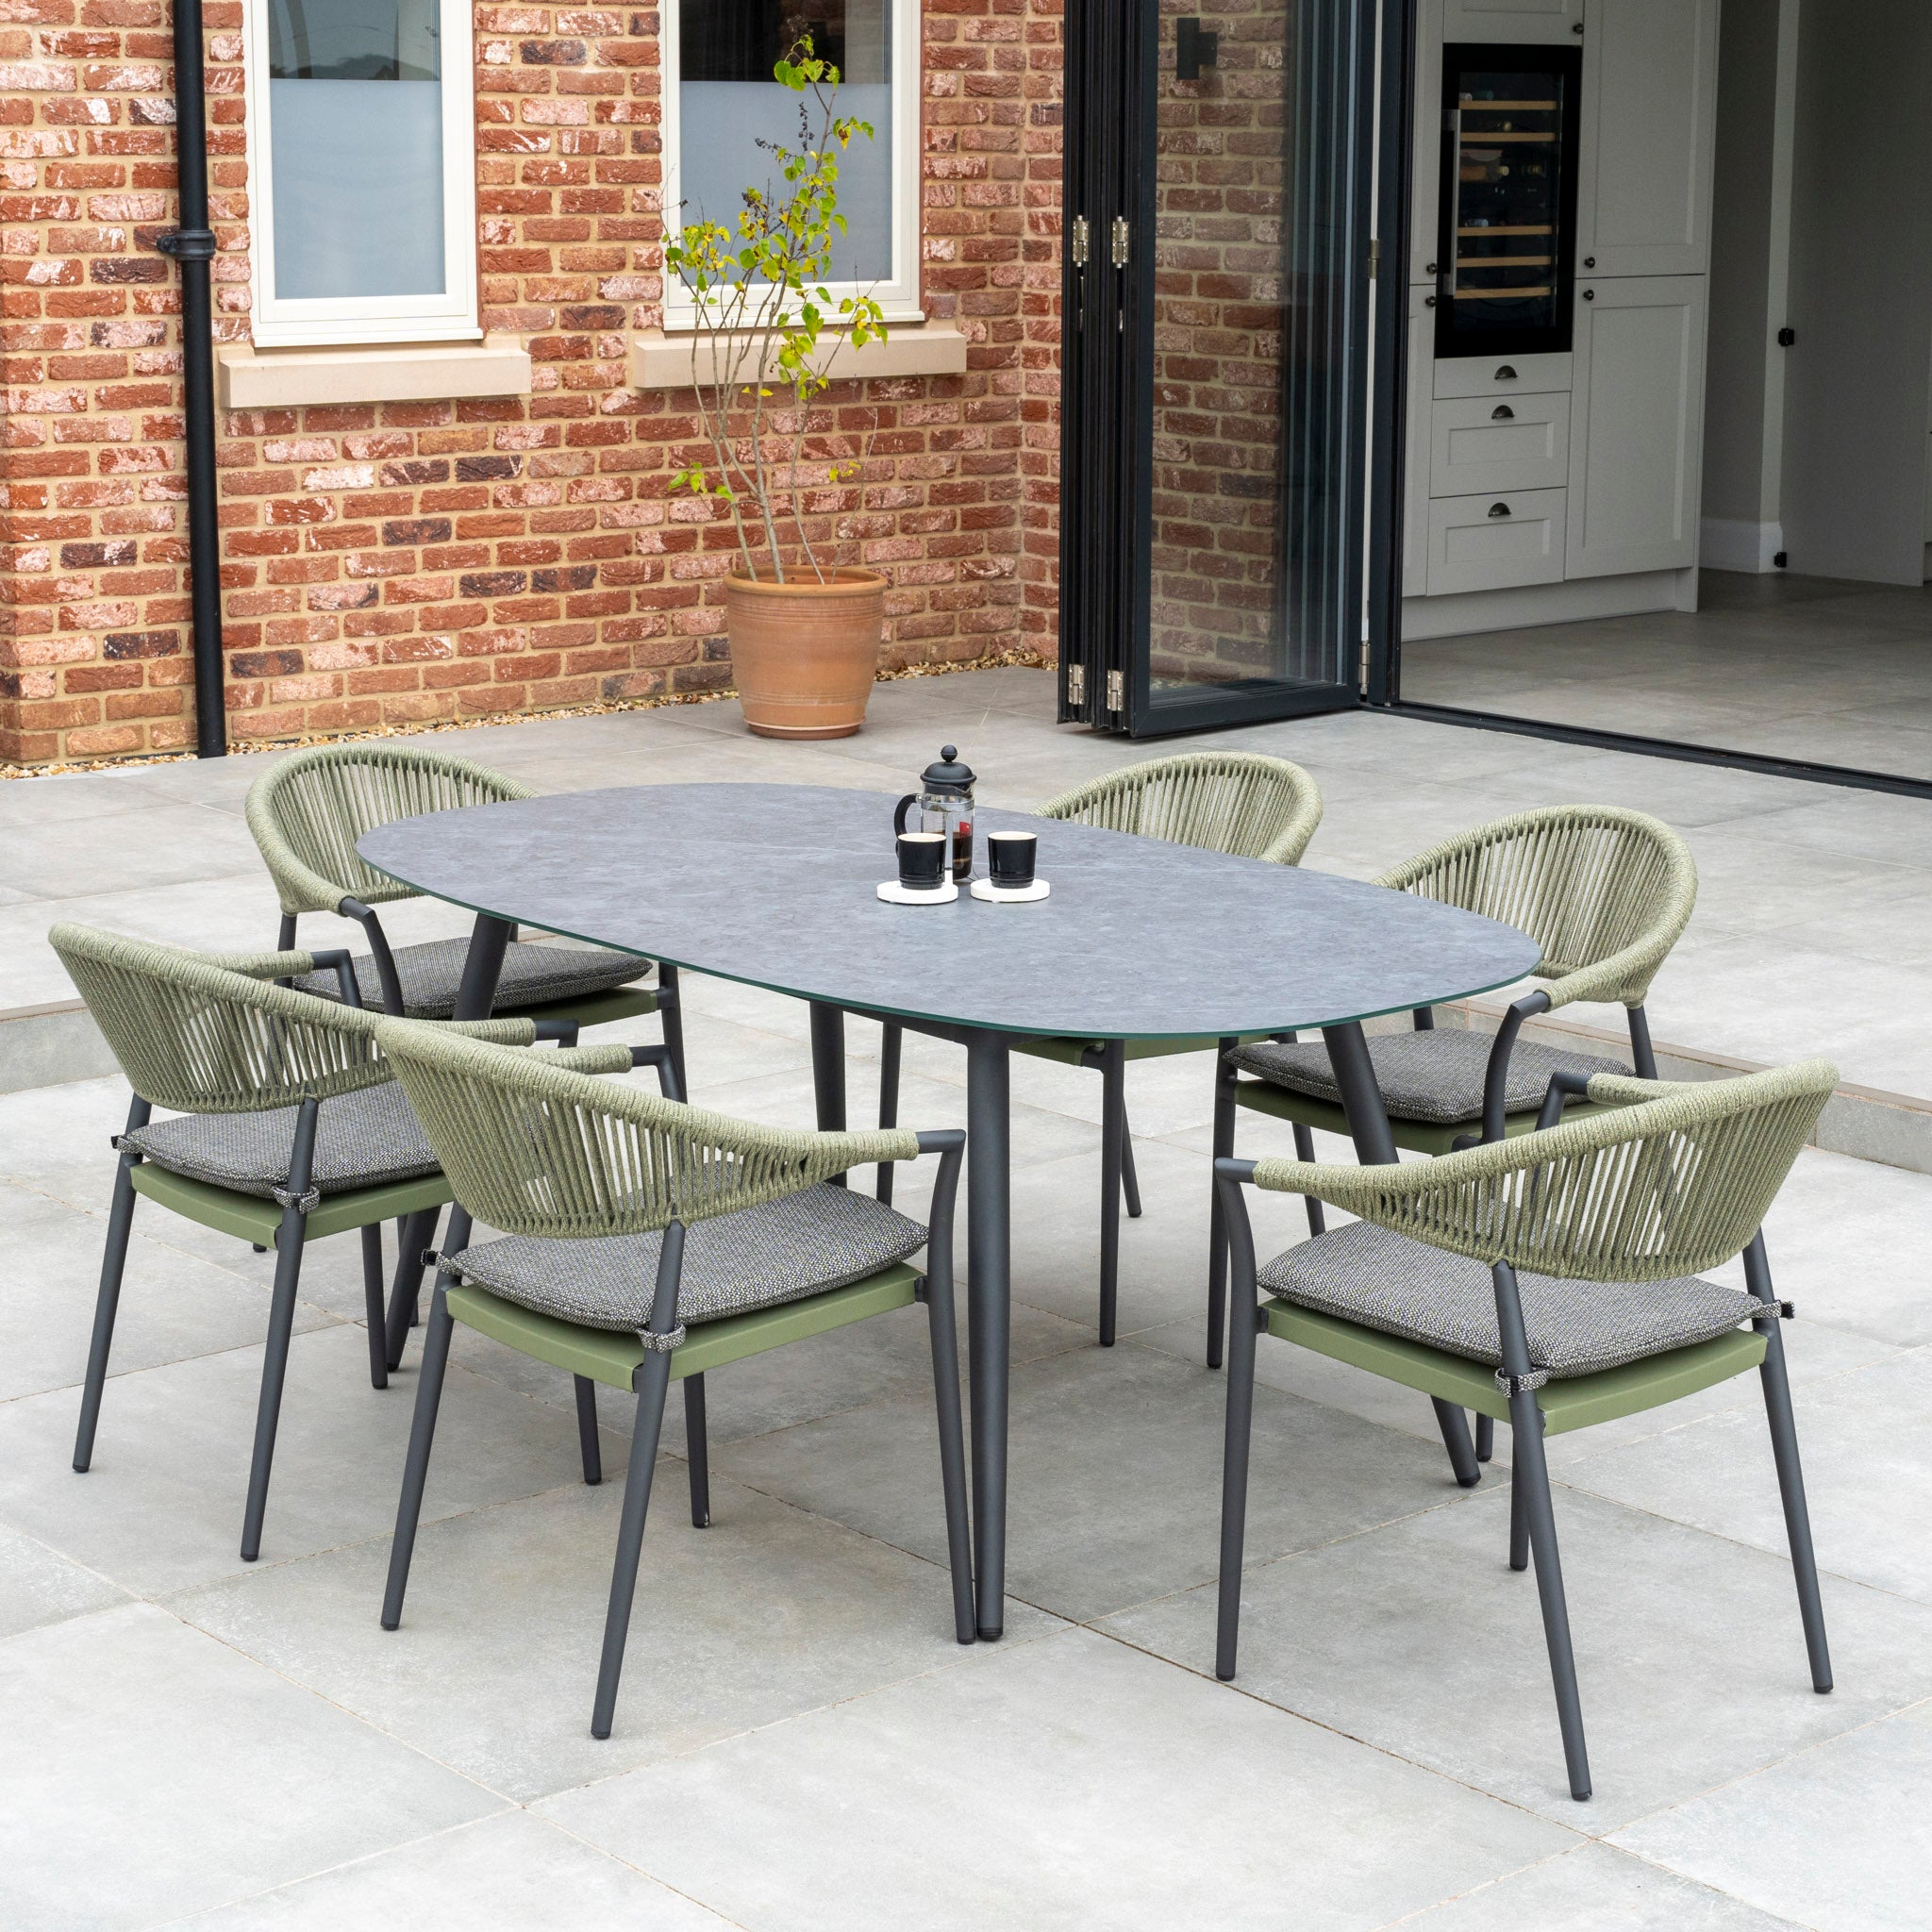 Cloverly 6 Seat Rope Oval Dining Set with Ceramic Table in Green